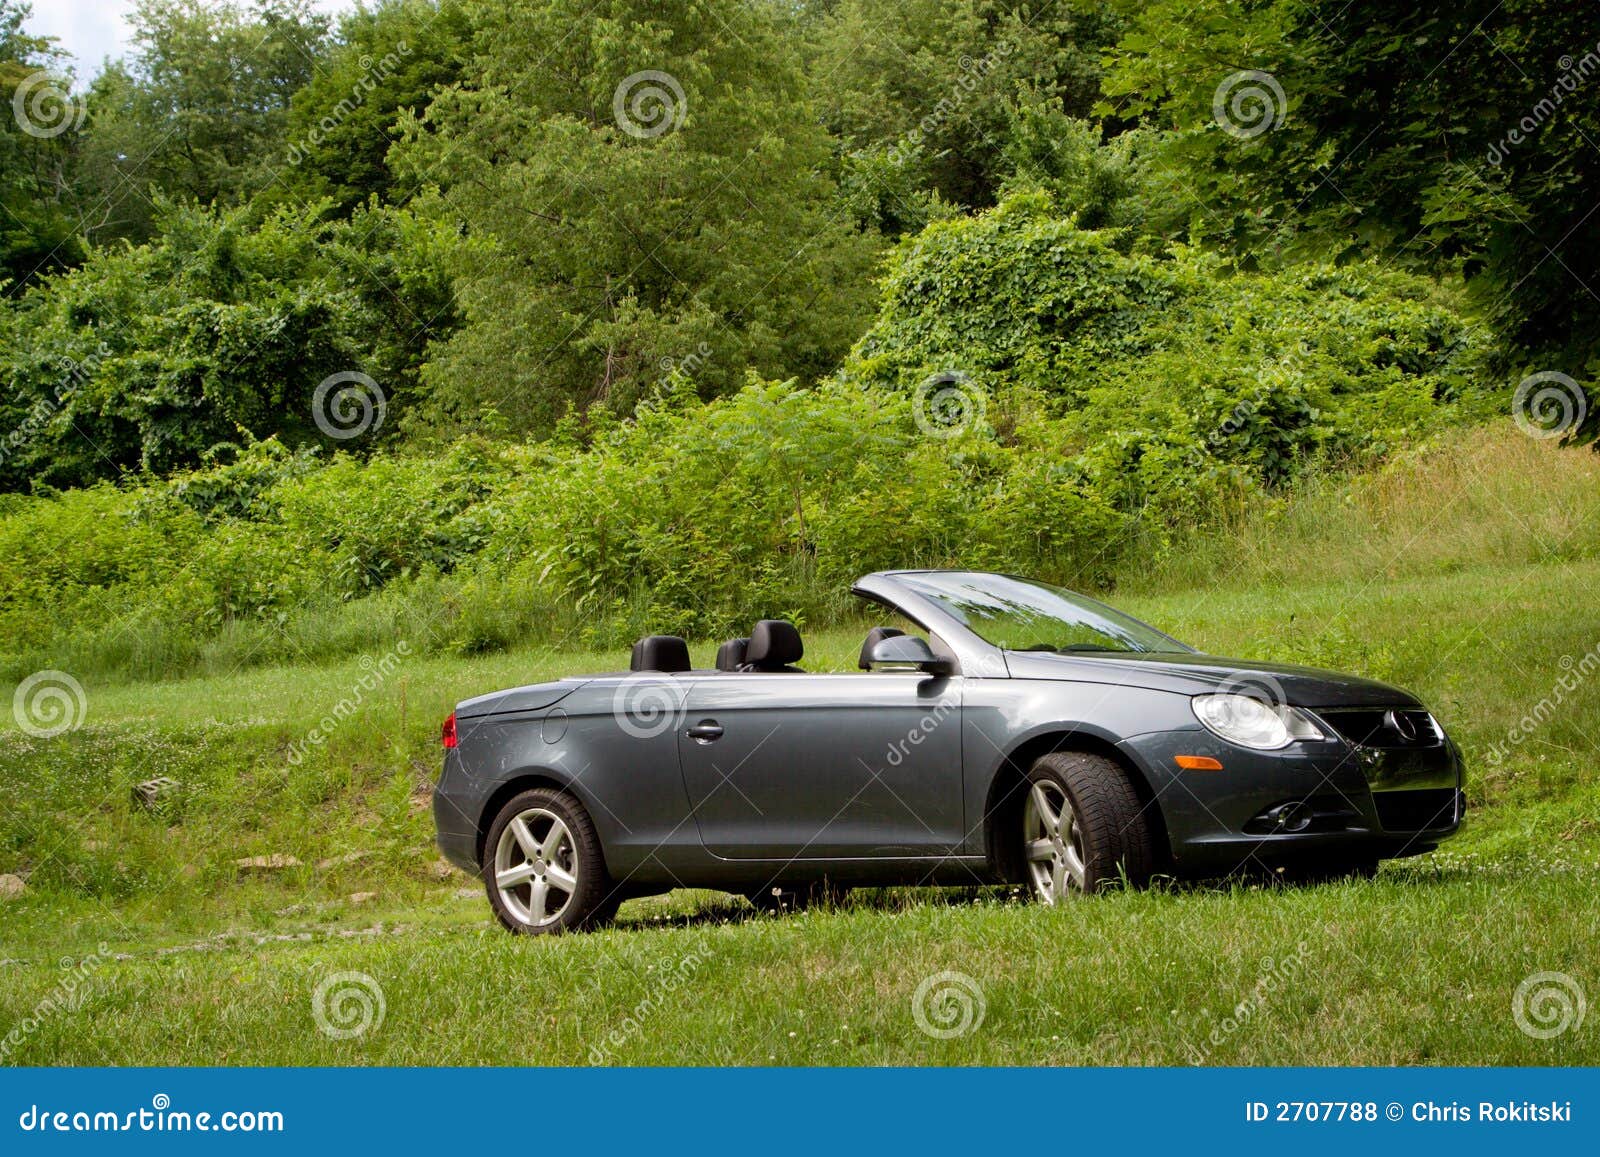 Convertible Parked In Field Royalty Free Stock Photos - Image: 2707788